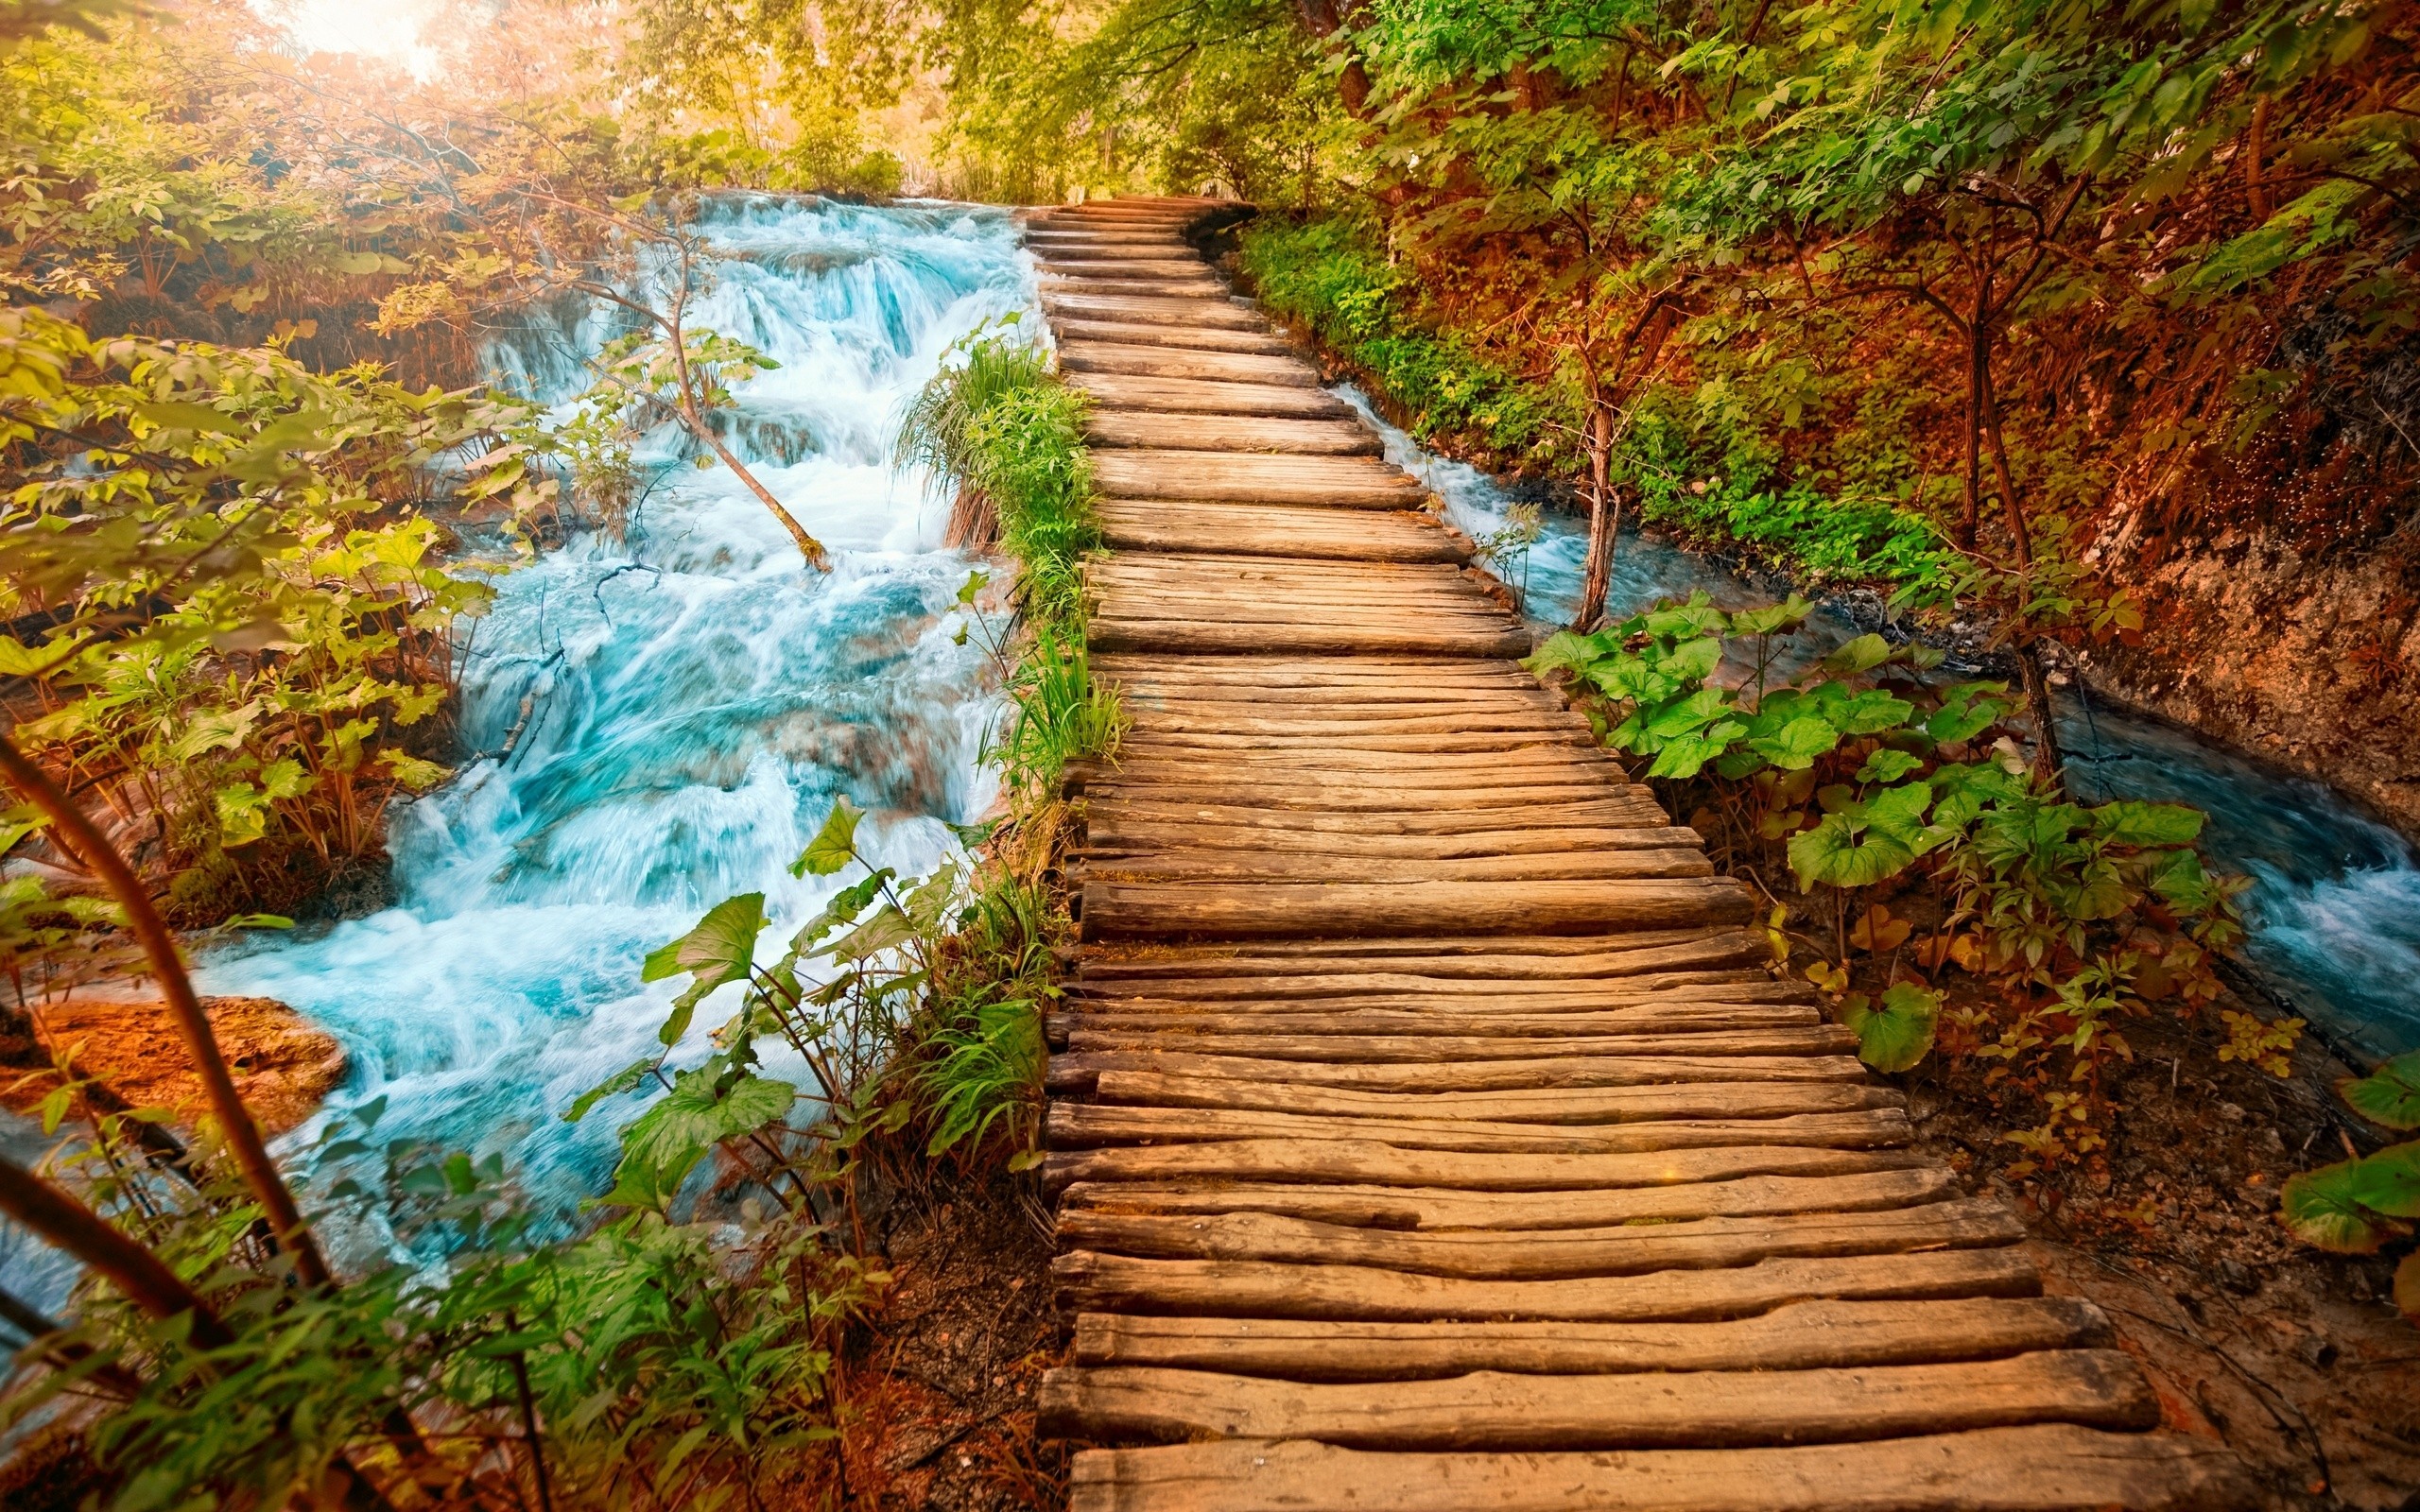 General 2560x1600 bridge river nature plants water outdoors path waterfall forest